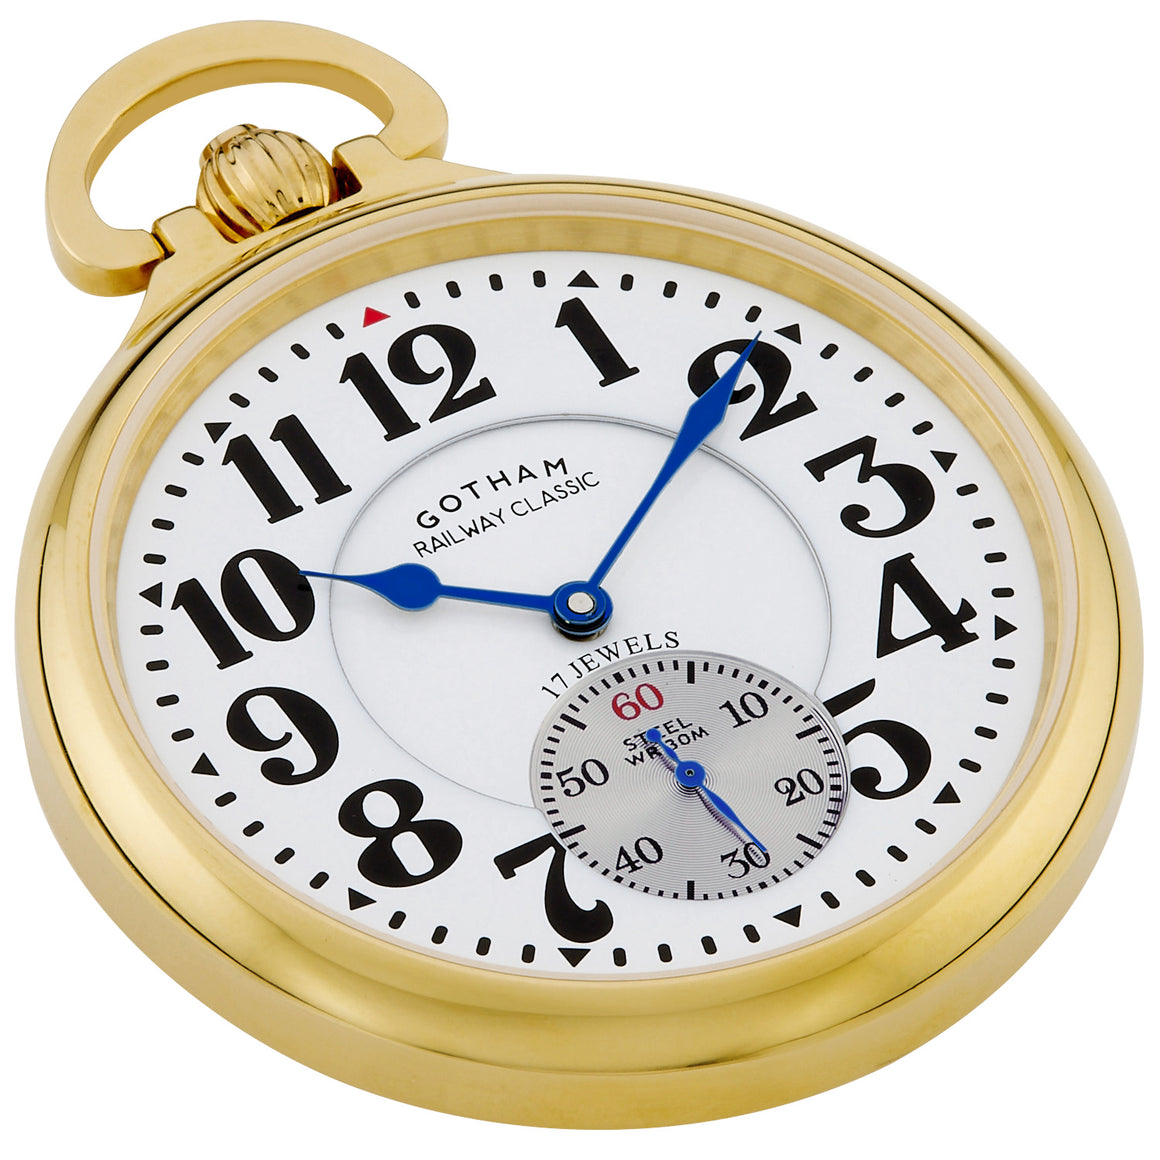 Gotham Men's Gold Plated Stainless Steel Mechanical Hand Wind Railway Classic Nostalgia Series Pocket Watch # GWC14123G